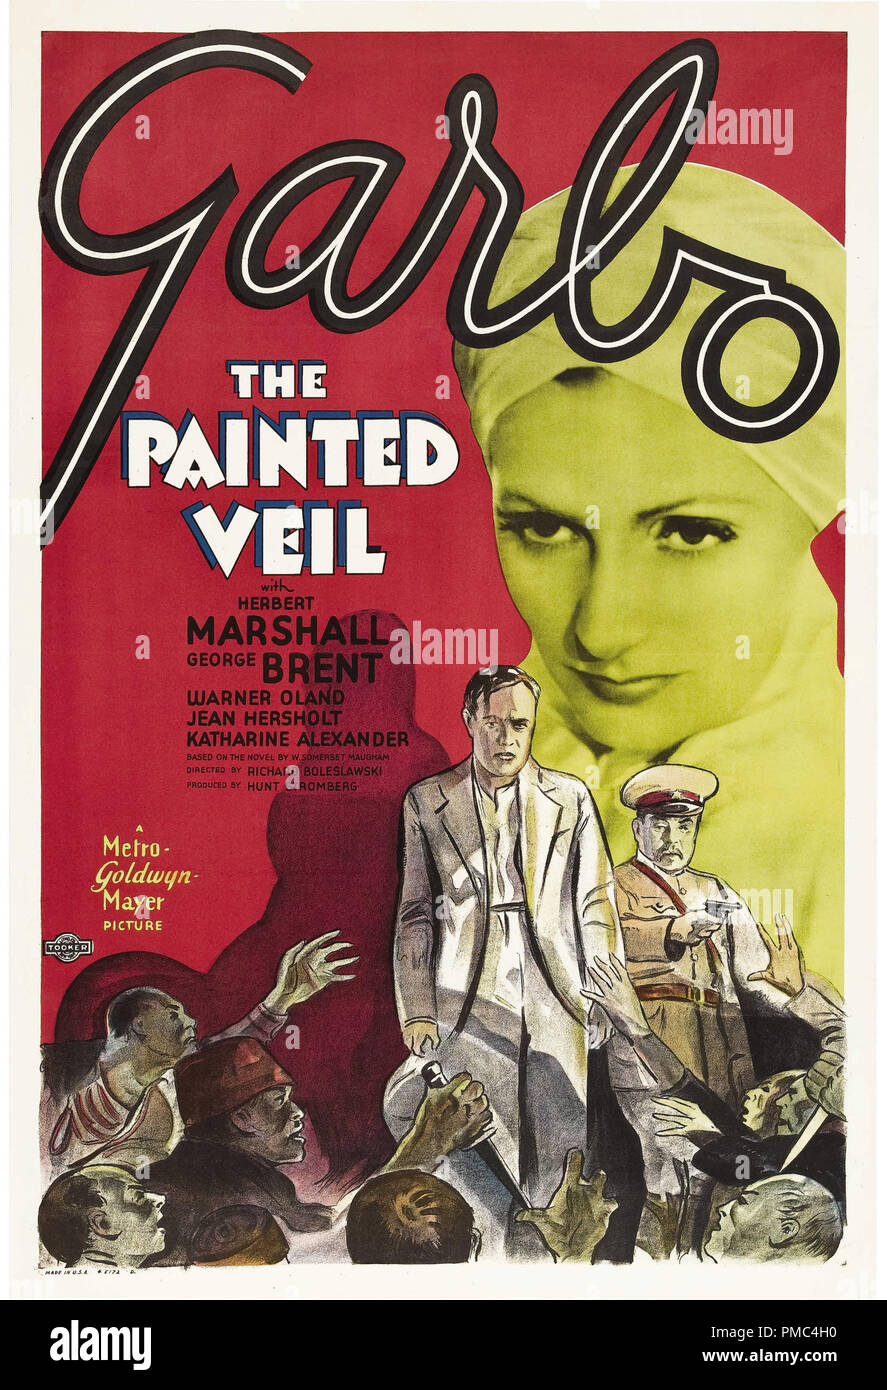 Greta Garbo,  The Painted Veil (MGM, 1934). Poster  File Reference # 33595_774THA Stock Photo